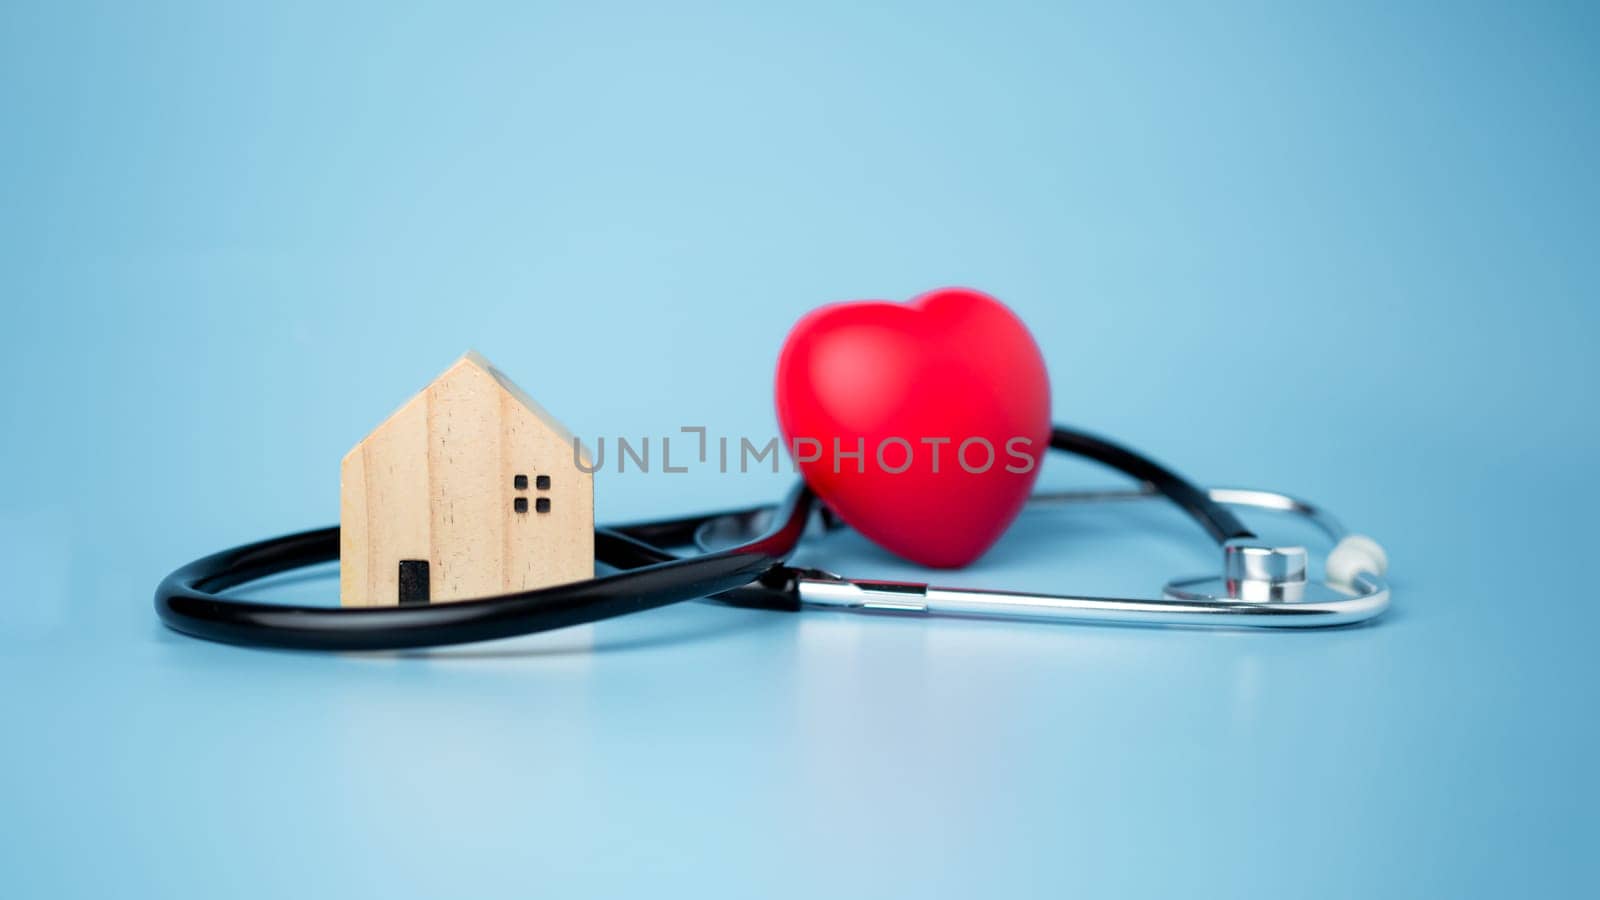 Concept of health insurance and medical welfare, small wooden house and red heart with stethoscope on blue background, health insurance and access to healthcare. by Unimages2527